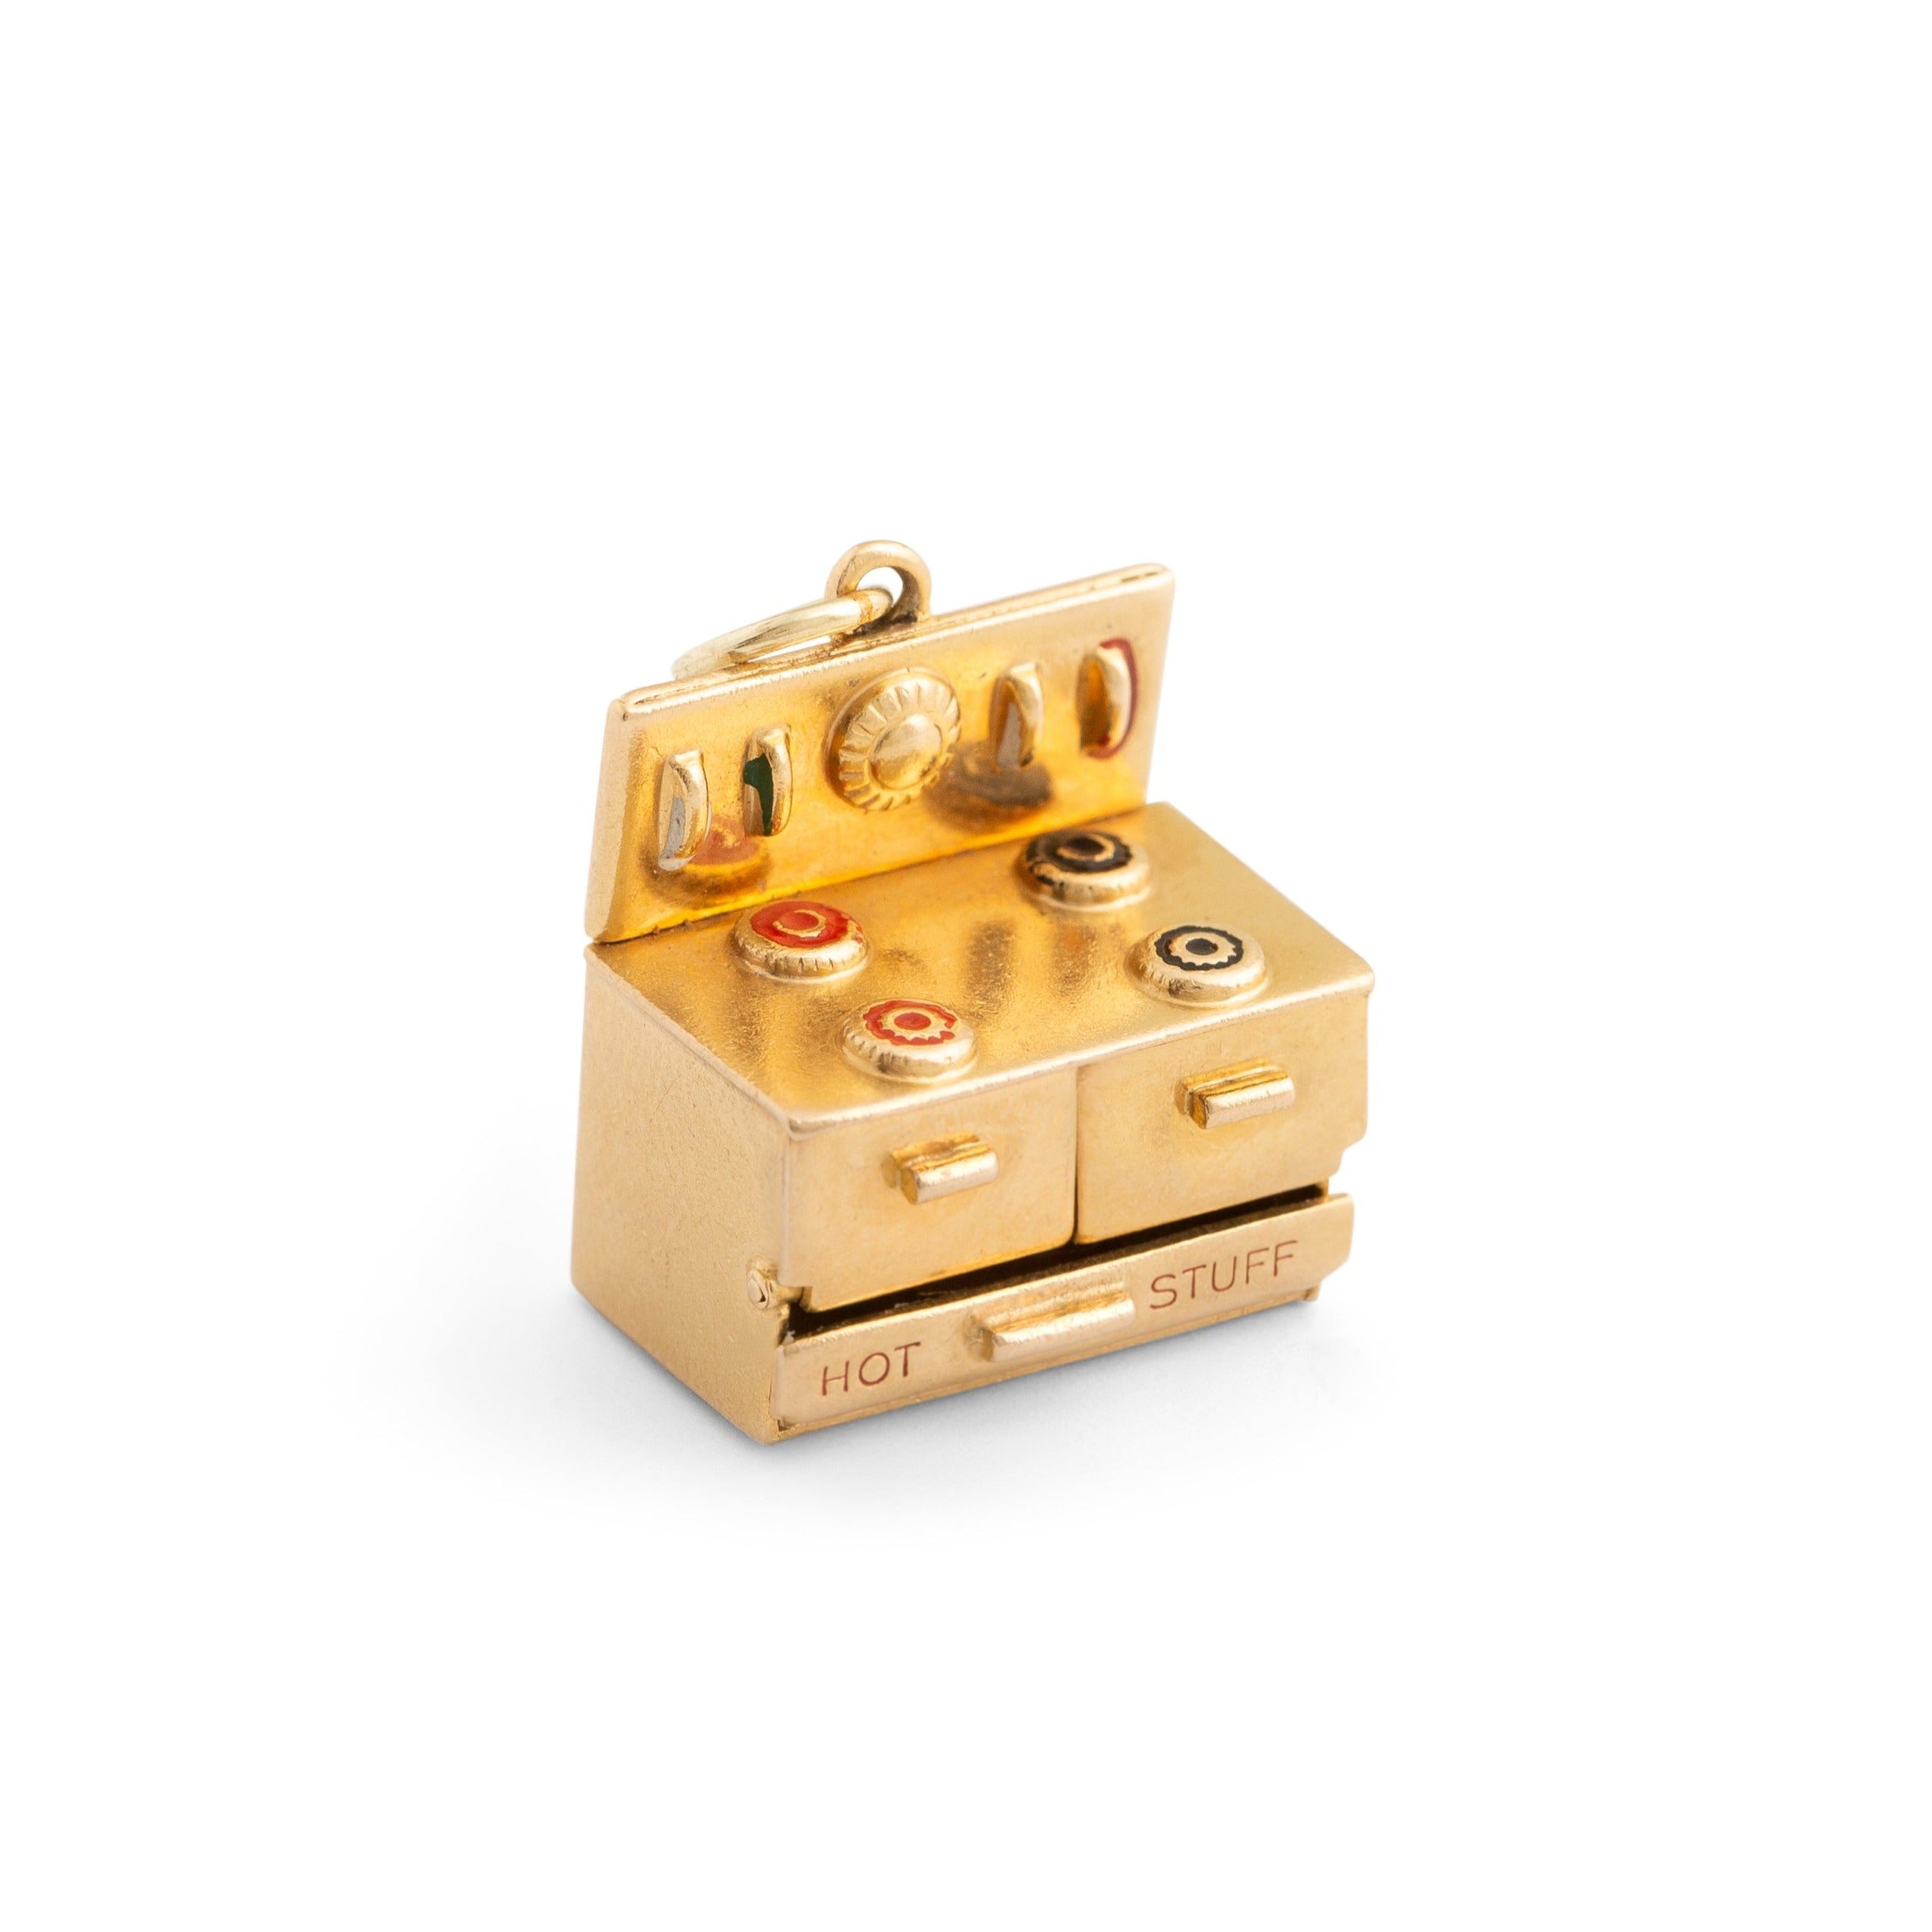 "Hot Stuff" Movable Stove Enamel and 14k Gold Charm